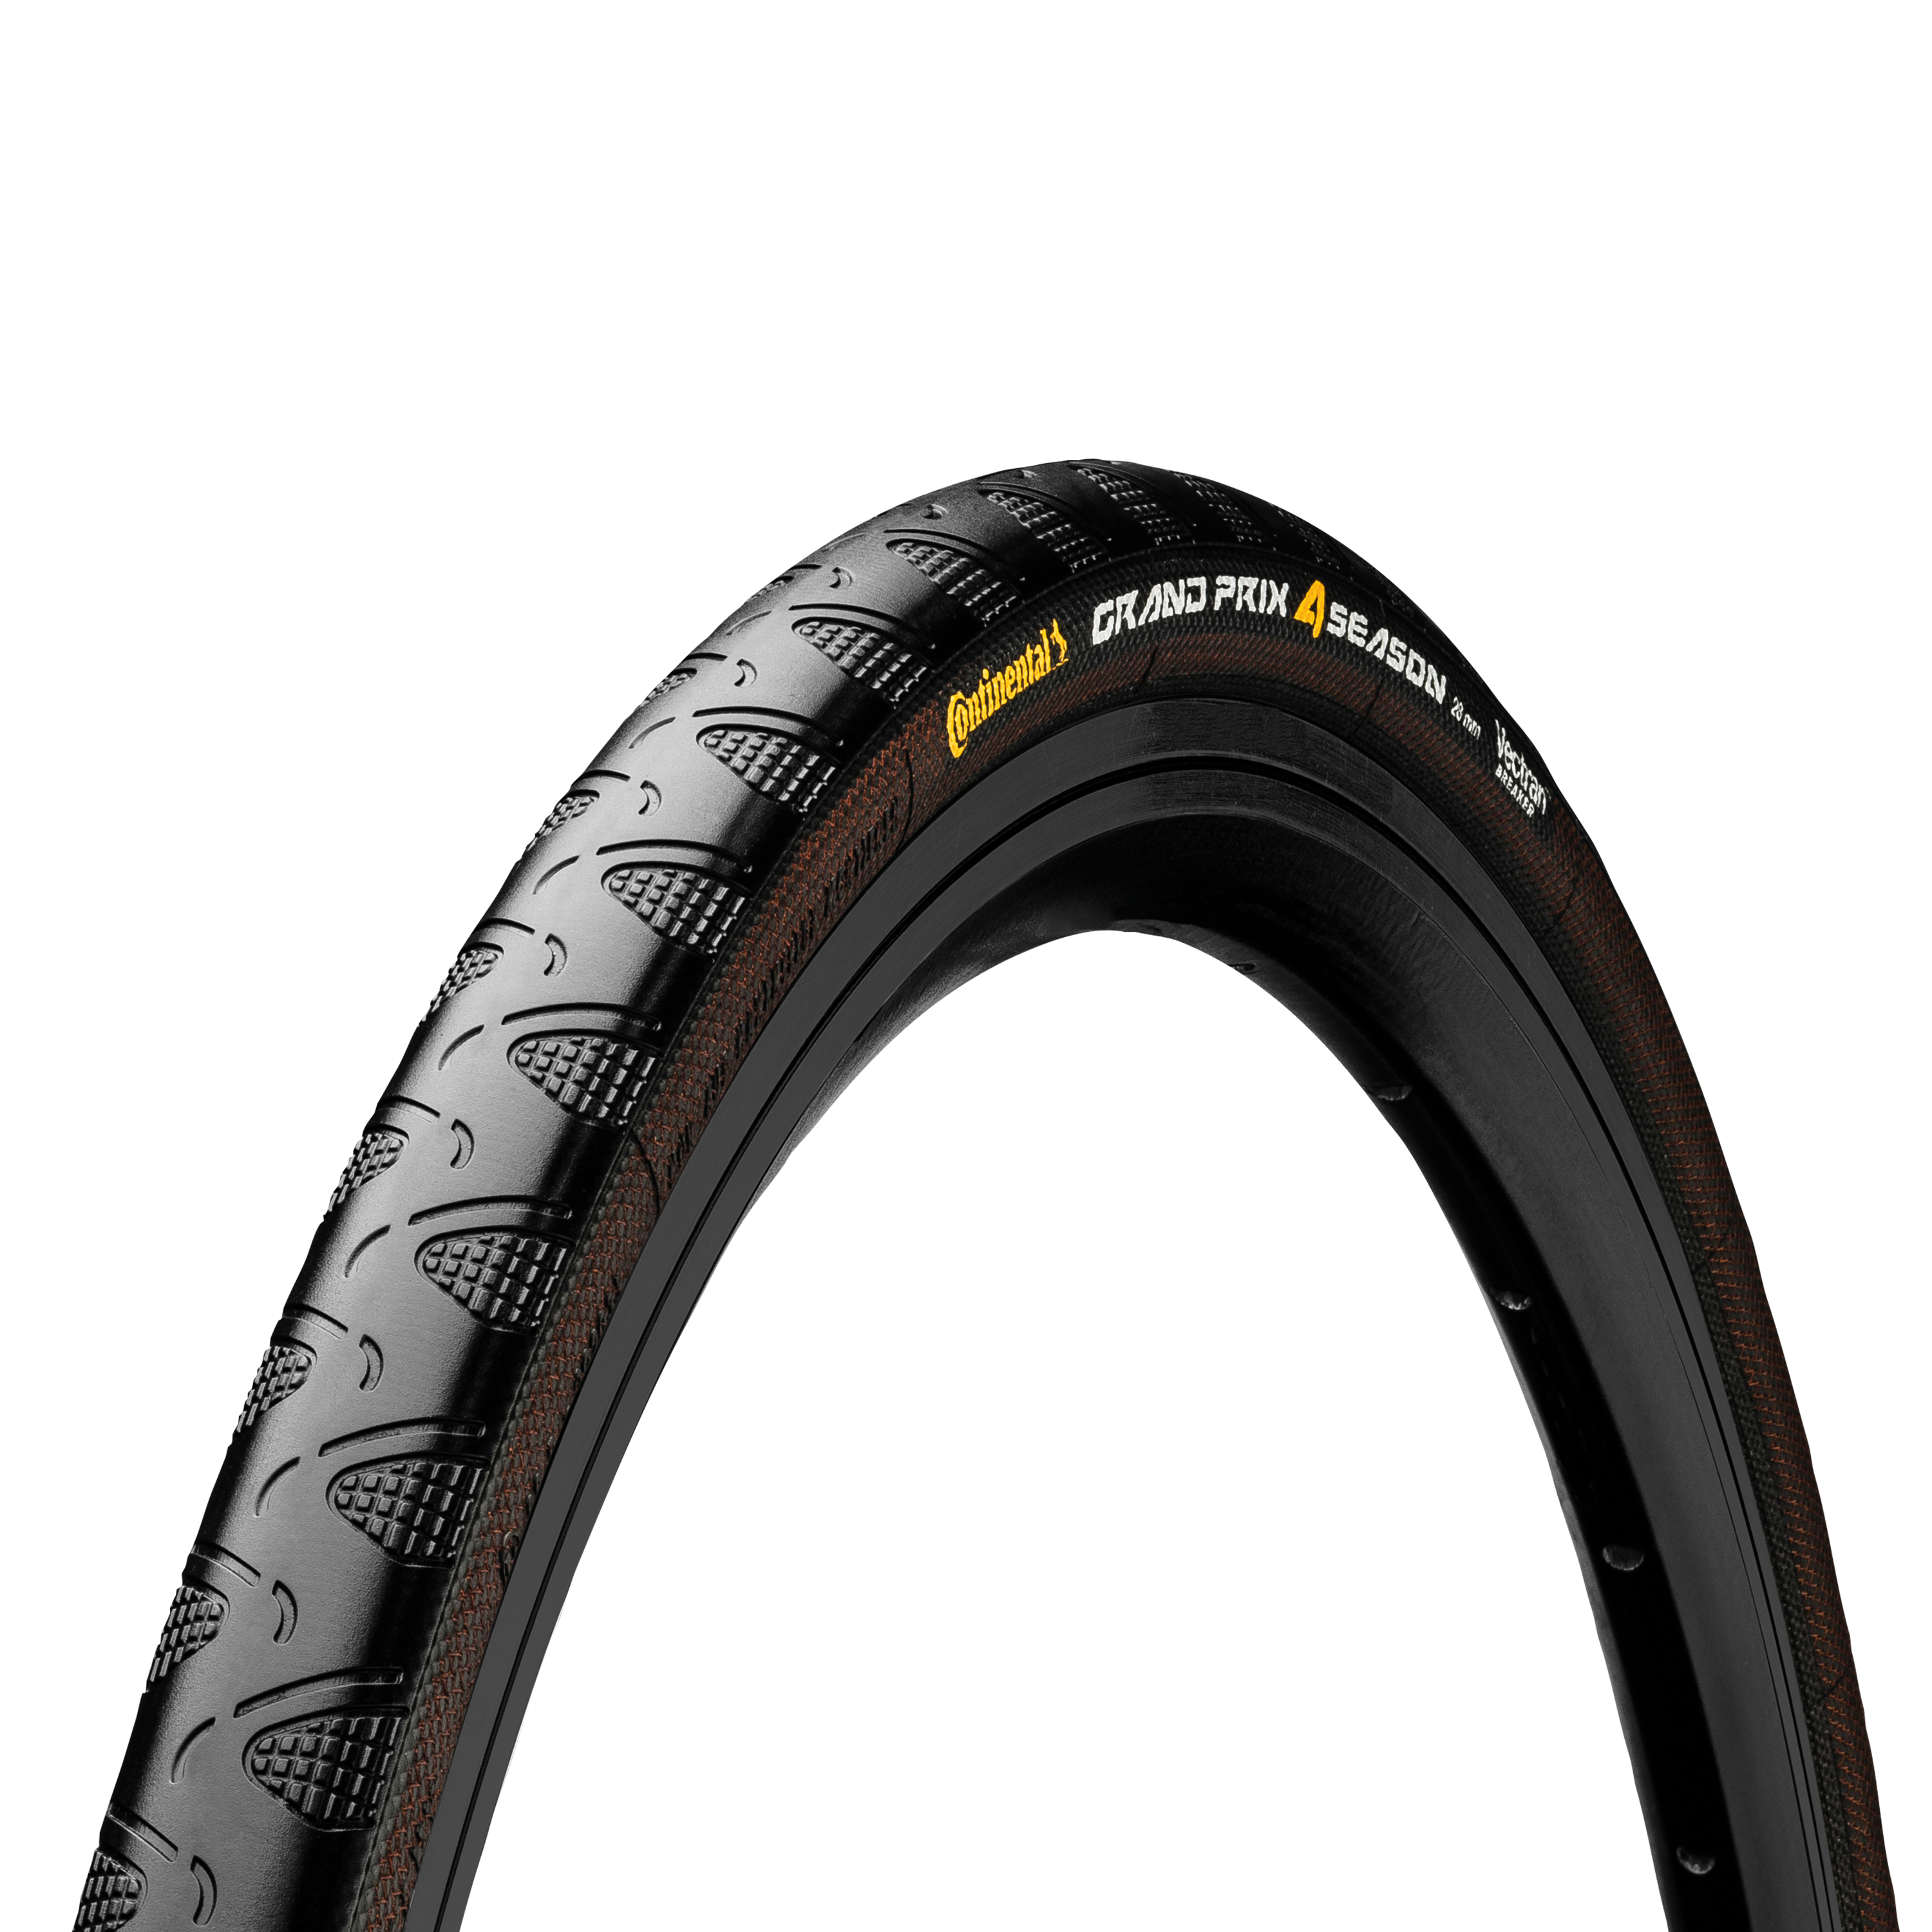 Grand Prix 4-Season: The road a for tire reliable all-year-round mileage companion cyclists and those high